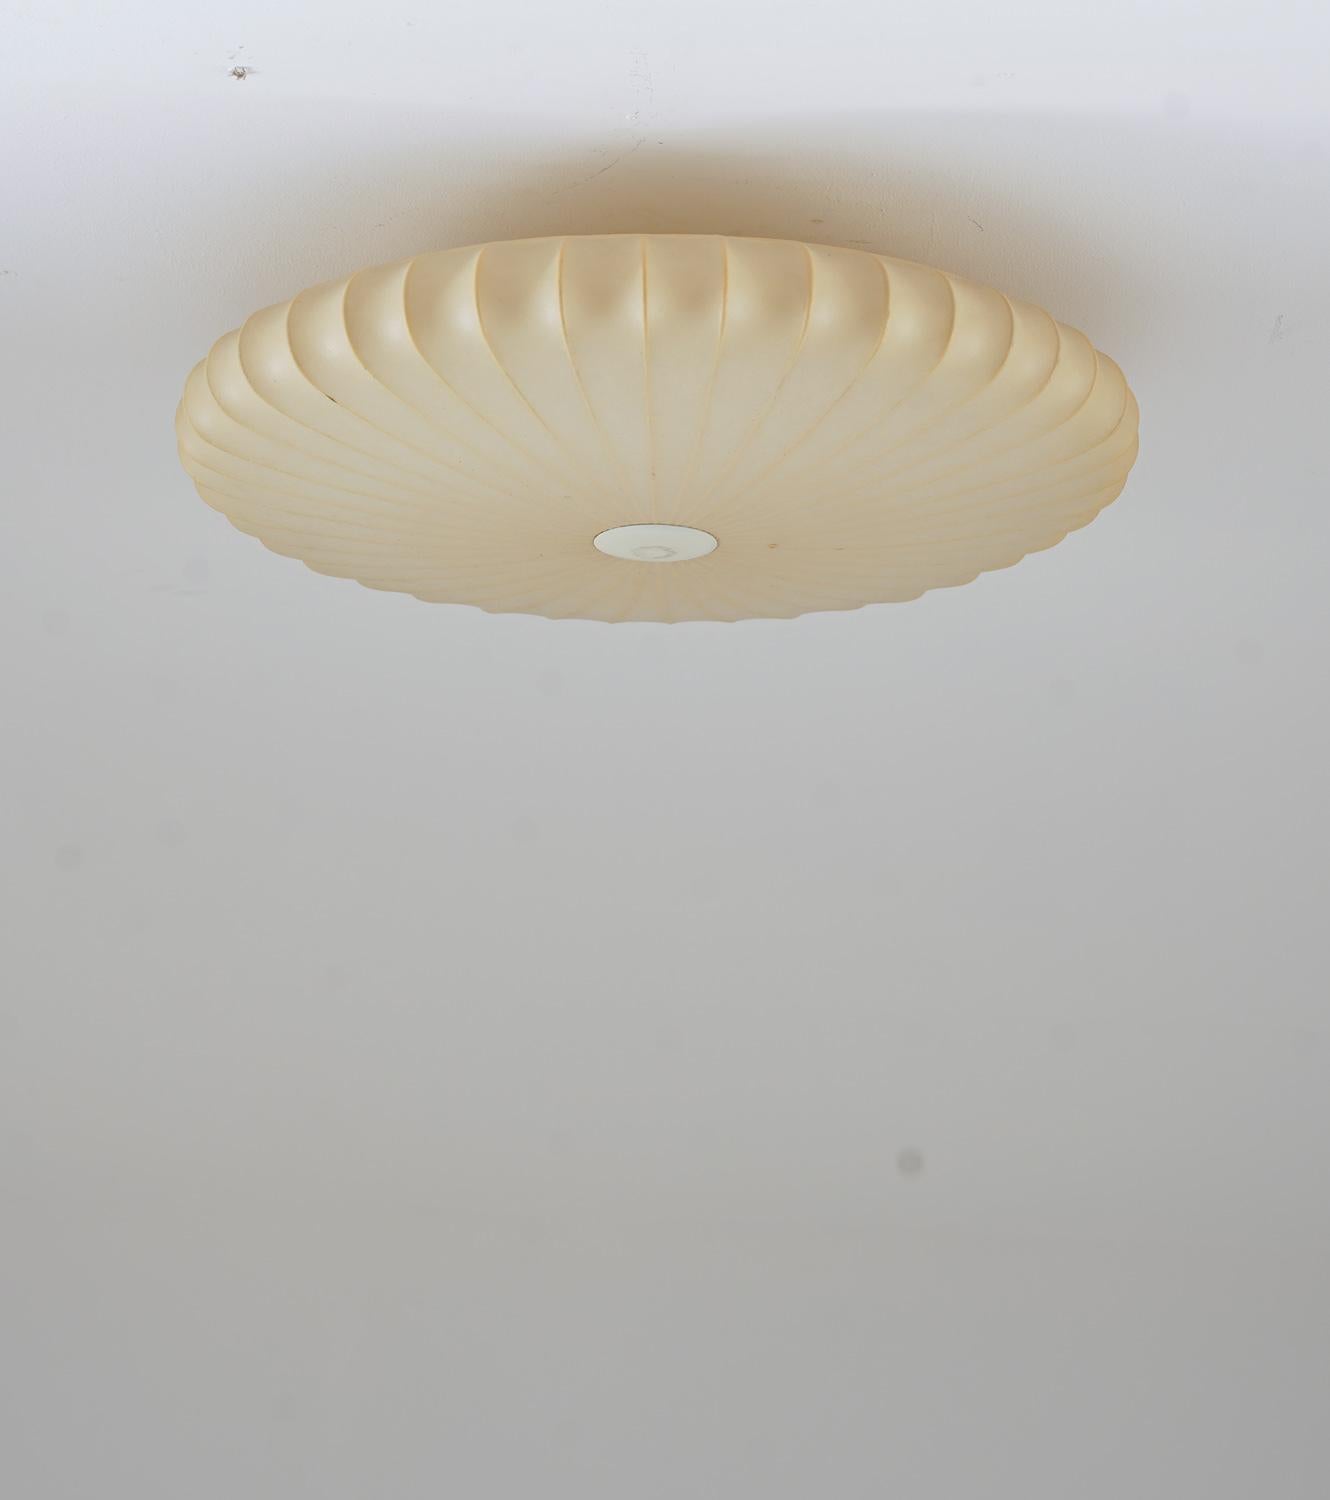 Rare flush mount by attributed to Hans Bergström for Ateljé Lyktan, Åhus.
The lamp consists of a brass body with three light sources, holding a spray plastic shade, that gives a stunning soft light when lit up.

Condition: very good original